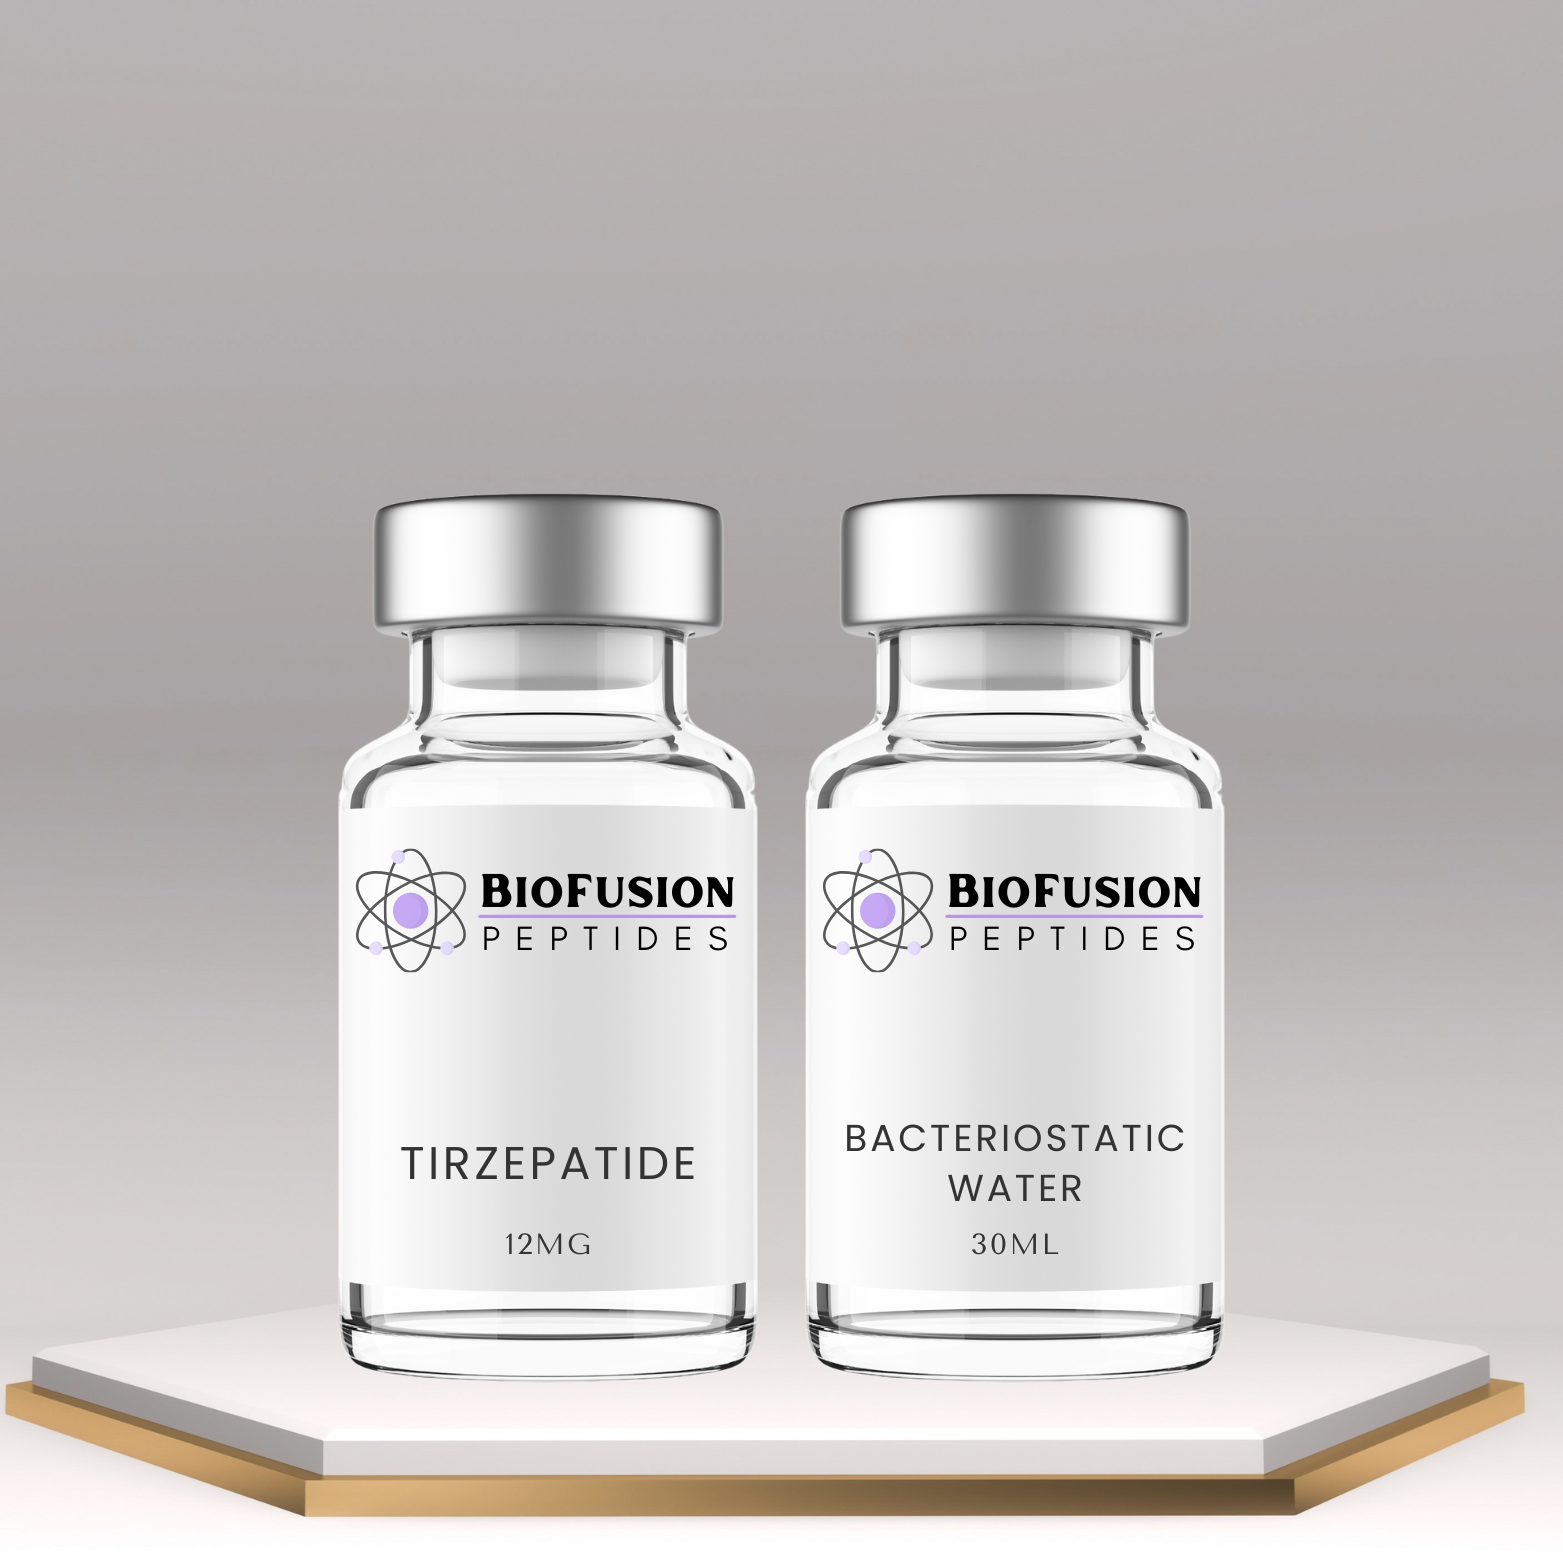 BioFusion Peptides Tirzepatide 12MG kit with bacteriostatic water